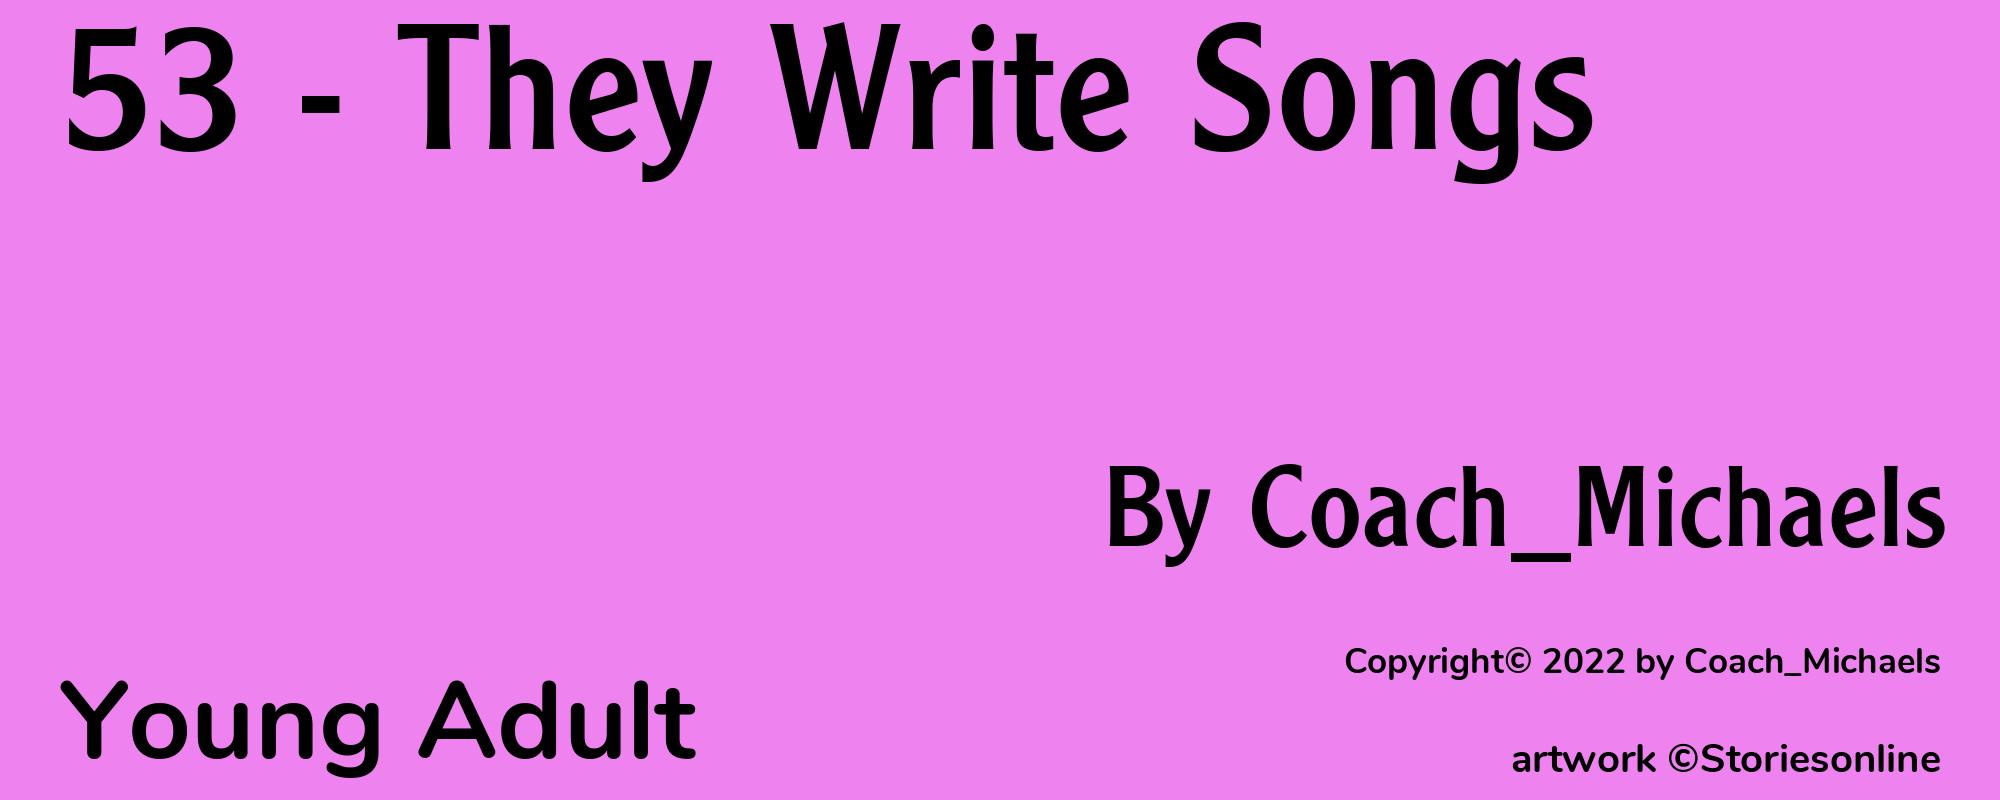 53 - They Write Songs - Cover